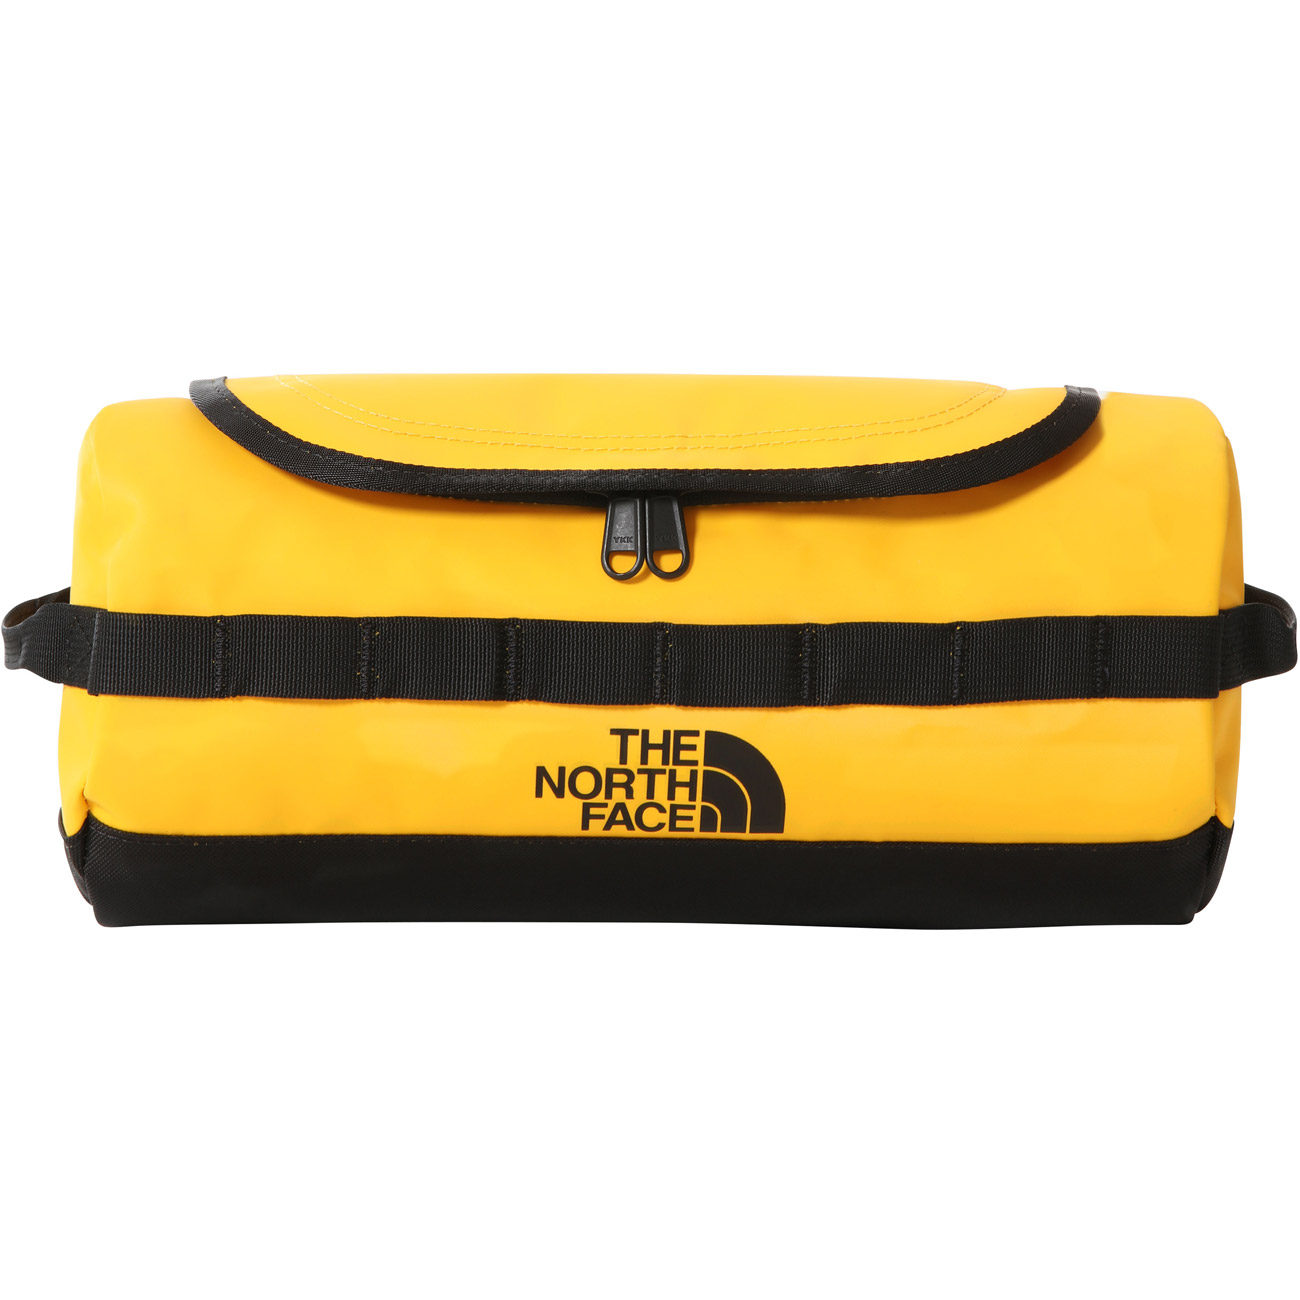 The North Face Funktionsrucksack Bc Travel Canister L von The North Face